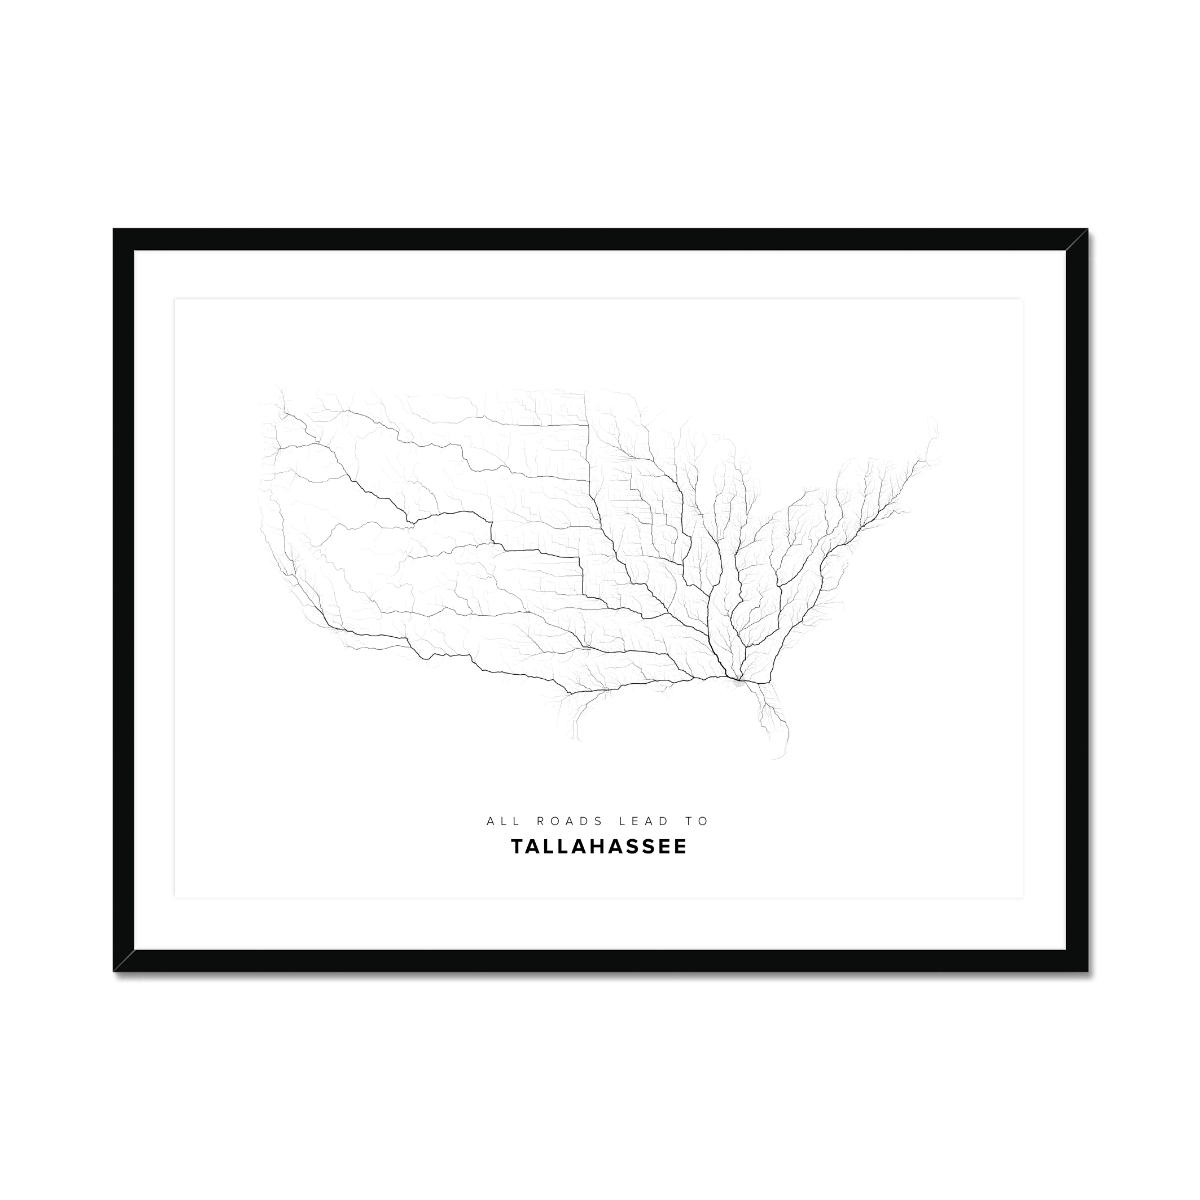 All roads lead to Tallahassee (United States of America) Fine Art Map Print